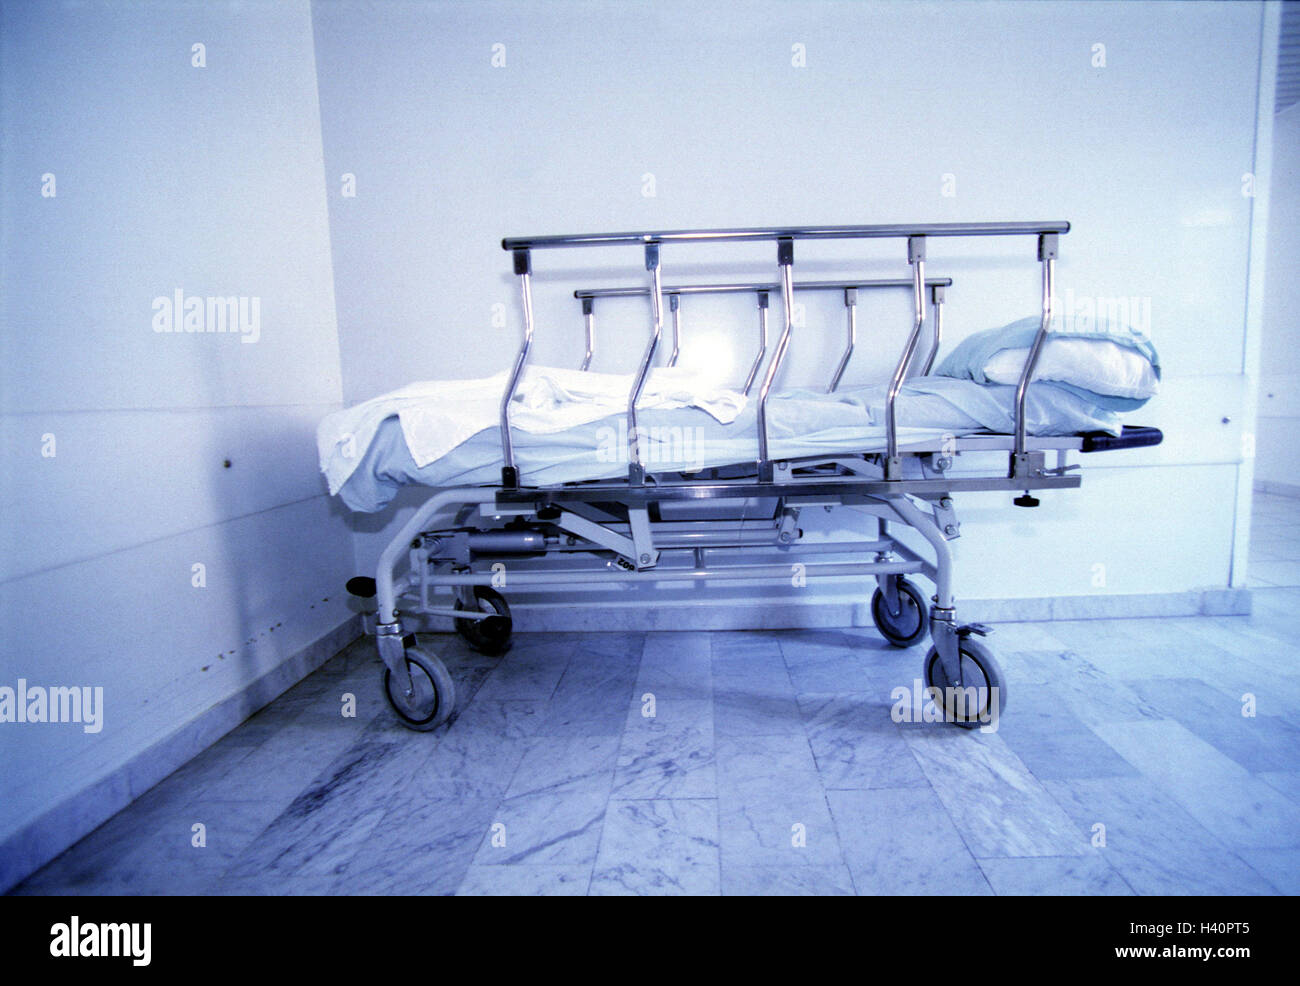 Hospital, hall, transport couch, blank, clinic, walk, transport bed, rolling bed, patient's bed, sickbed, cot, put down, marble floor, stone floor, destiny, hopelessness, disease, medicine, colour mood, colour blue, Ti7 Stock Photo